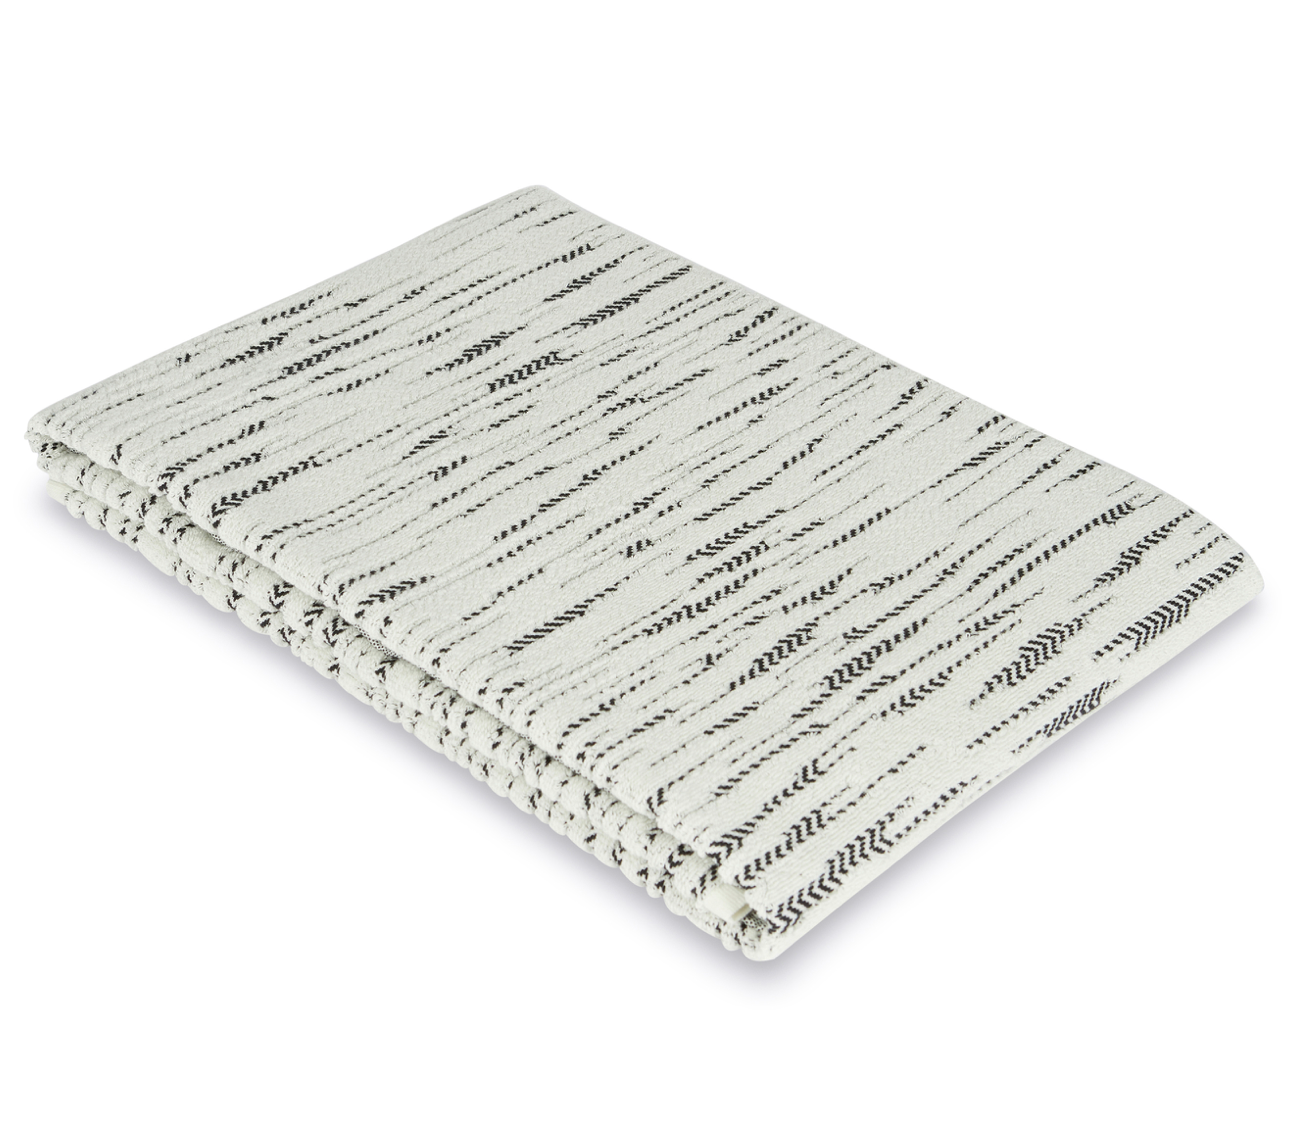 Missoni Home towels Carlyle 20